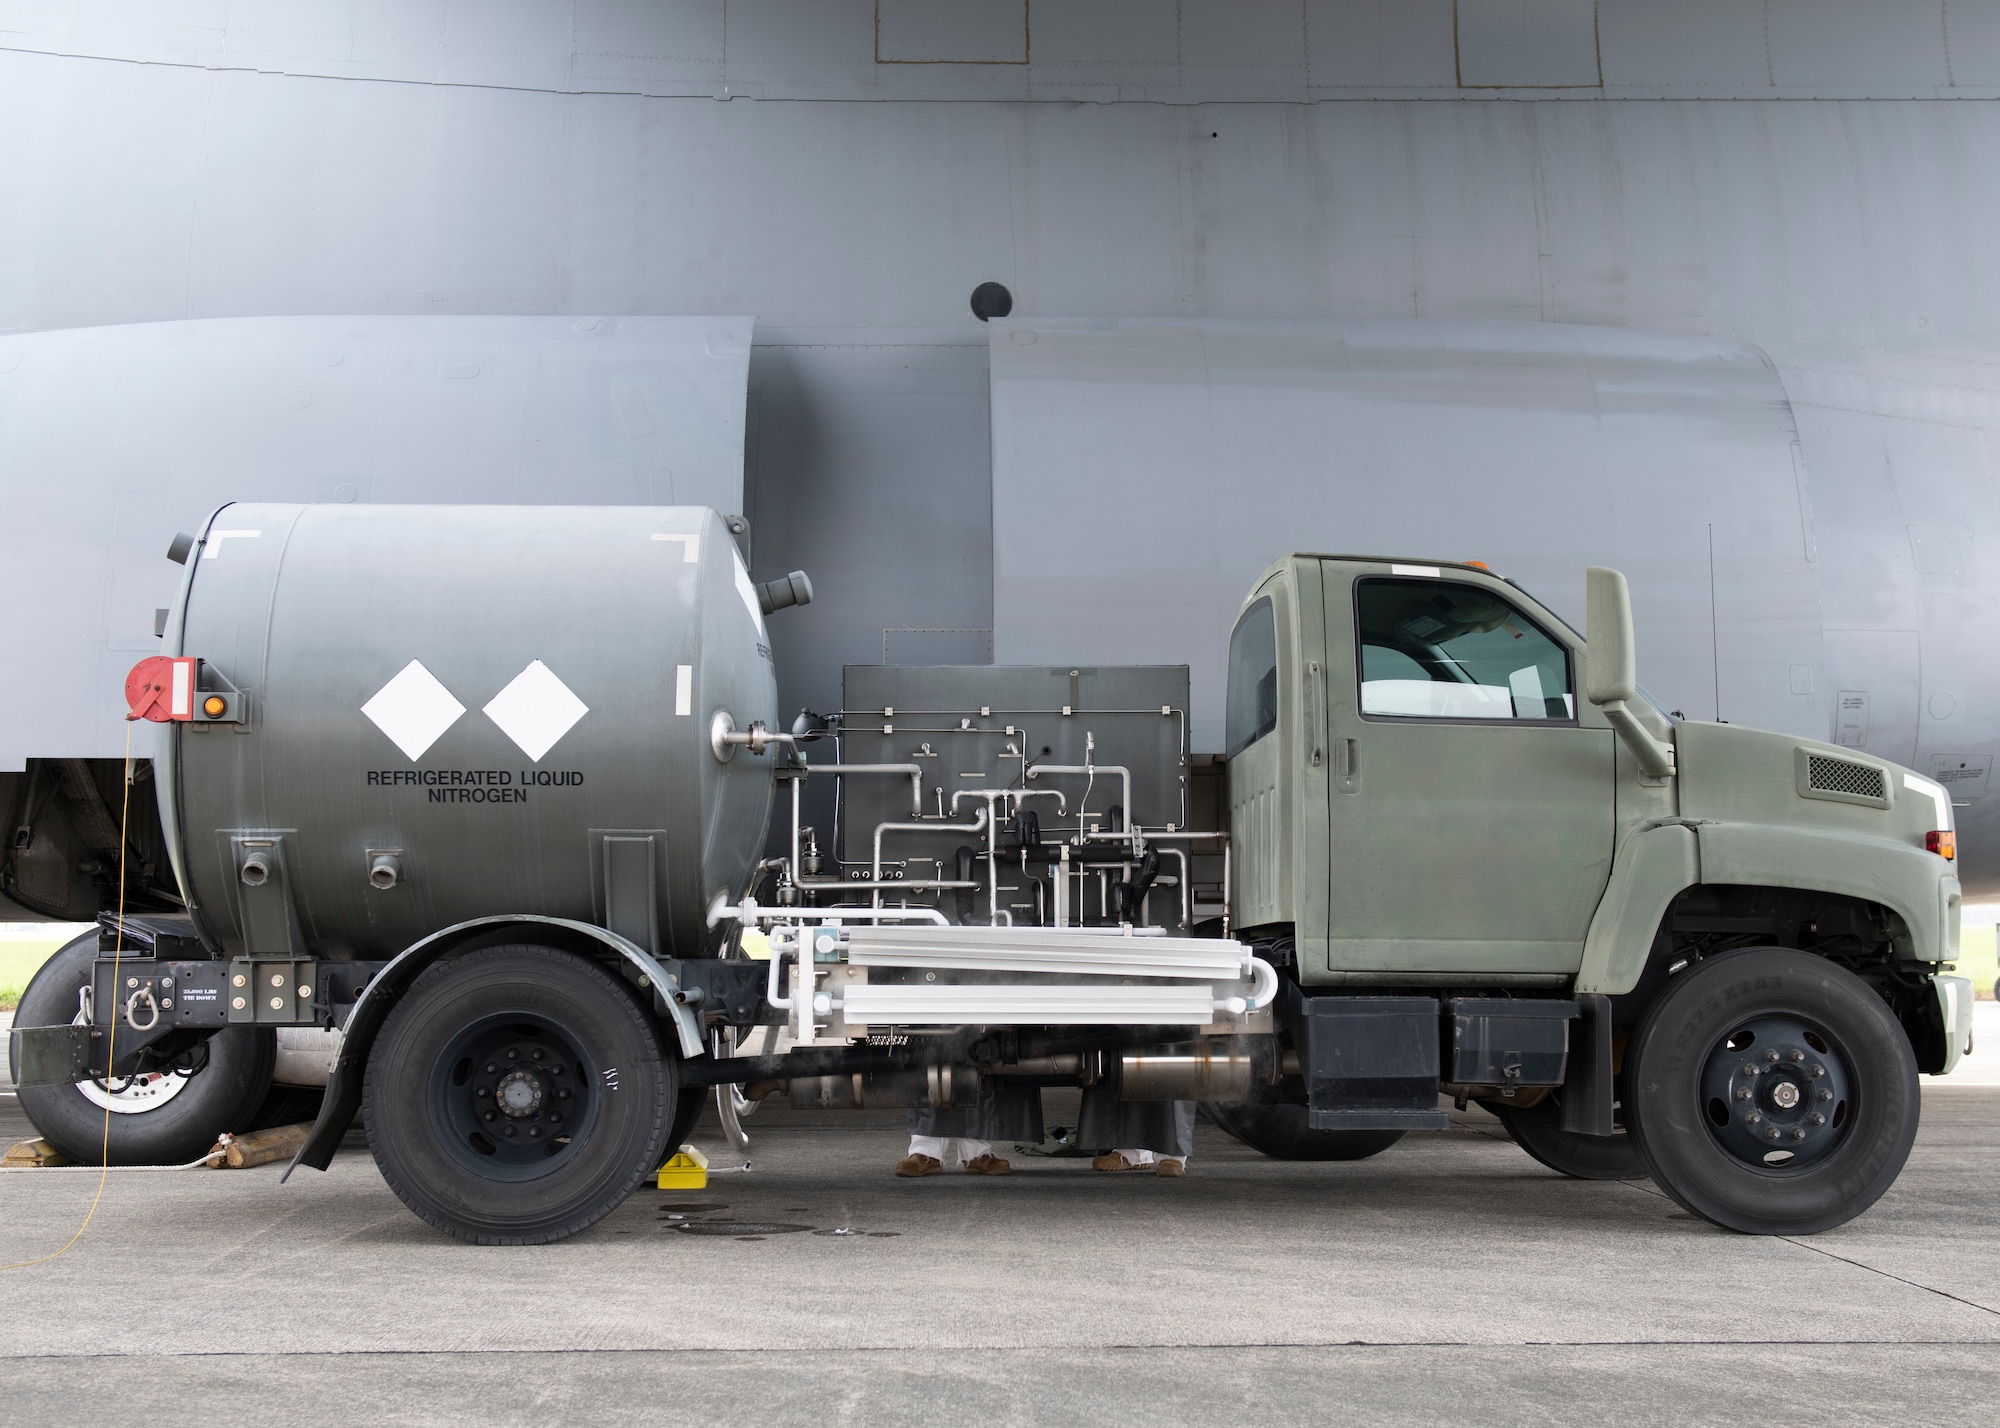 A utility truck with a large tank on the back is parked next to a much larger cargo plane